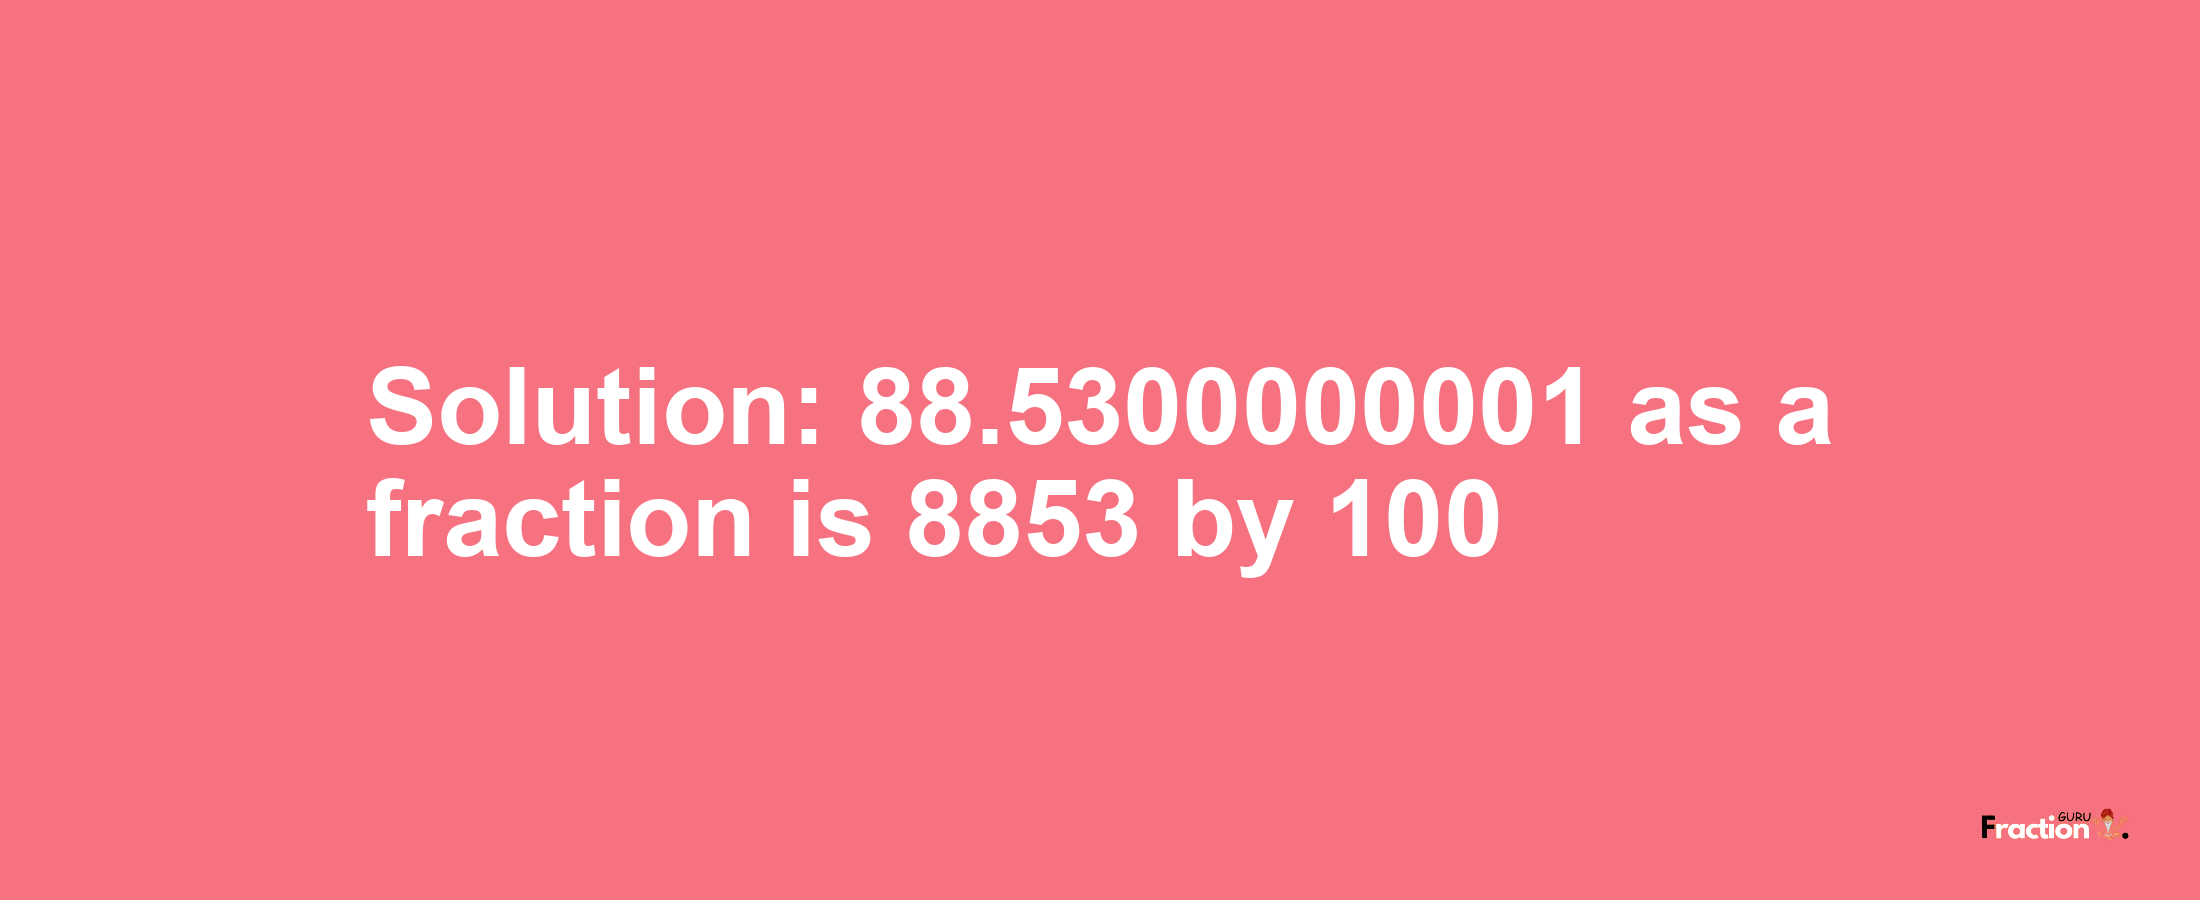 Solution:88.5300000001 as a fraction is 8853/100